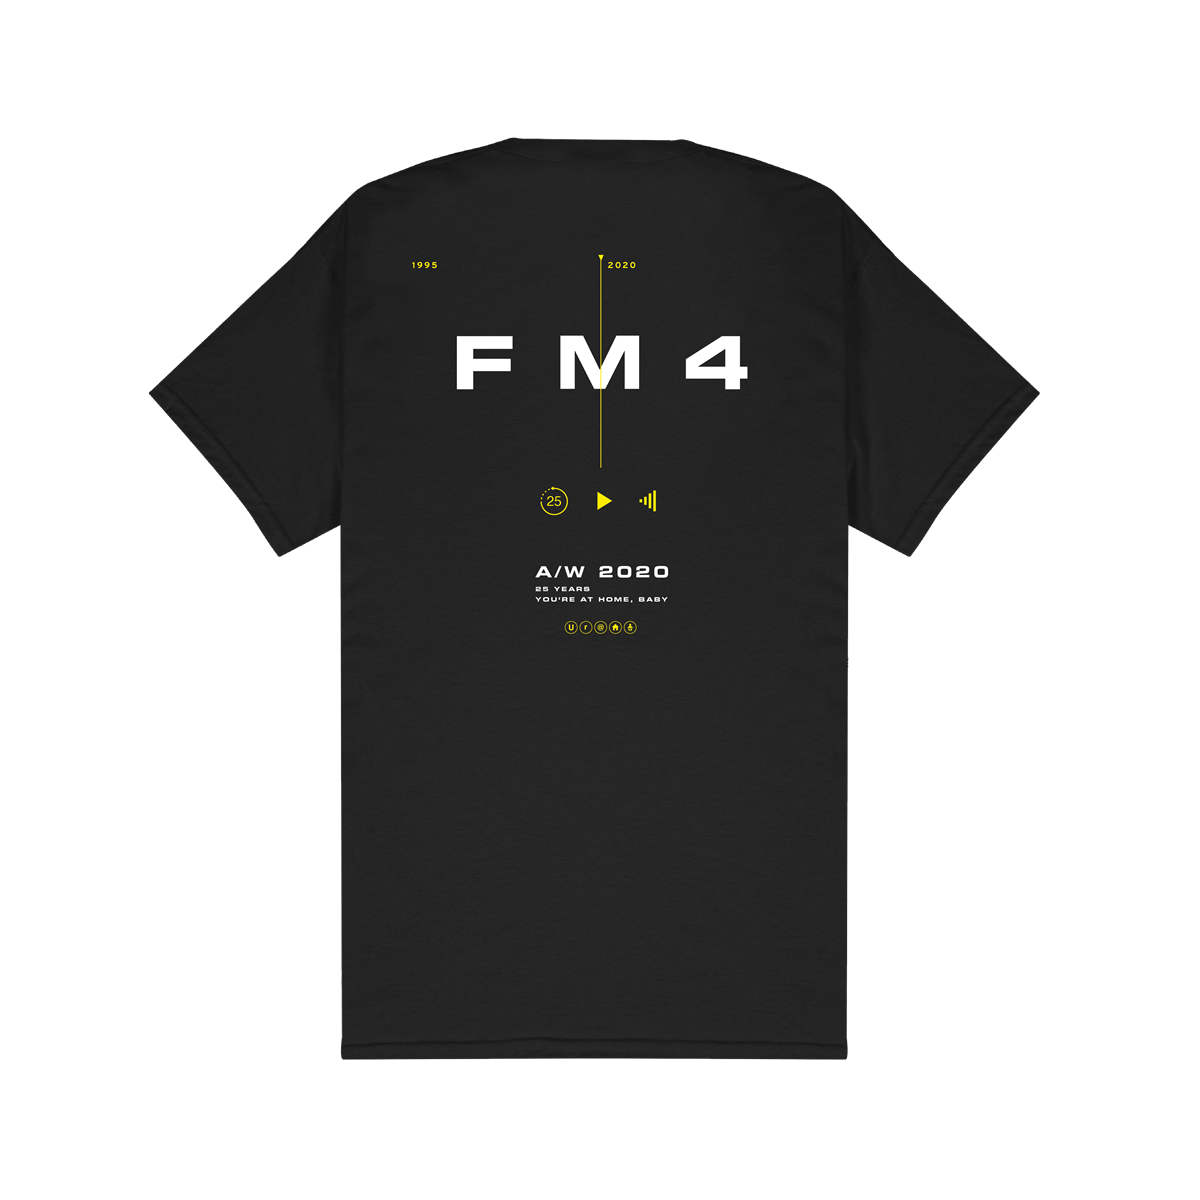 FM4 x peng! - 25 years anniversary collection_T-Shirt_back_EUR 35